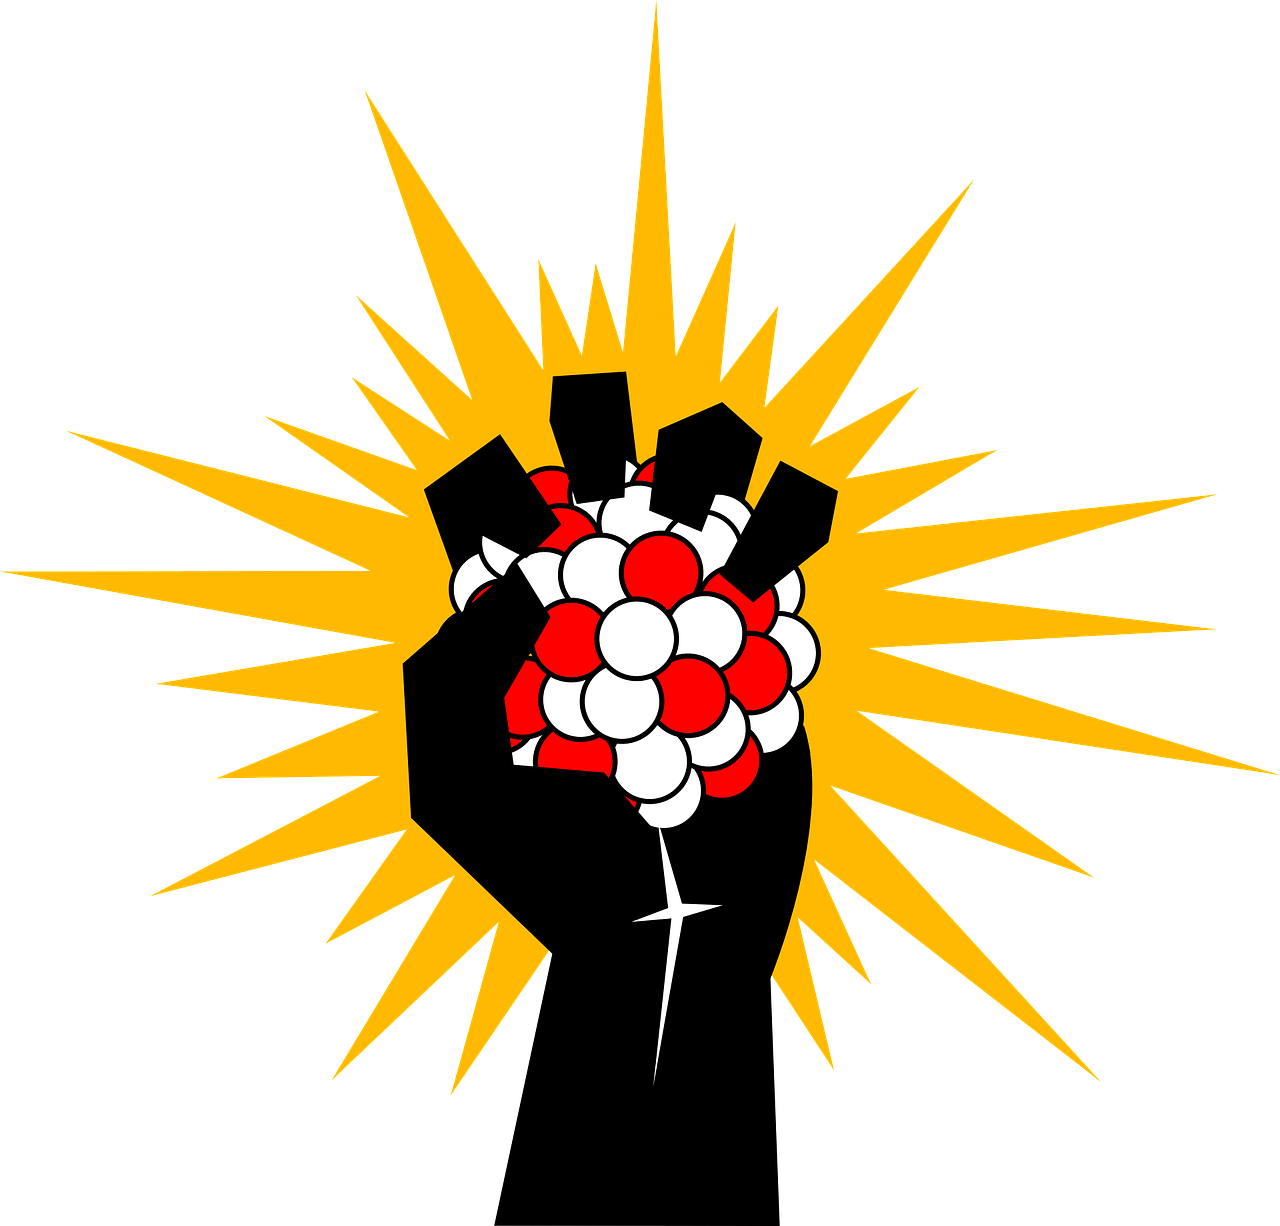 a hand holding a bunch of red and white balls, inspired by Irvin Bomb, nuclear art, propaganda logo, black and yellow and red scheme, powers, emblem